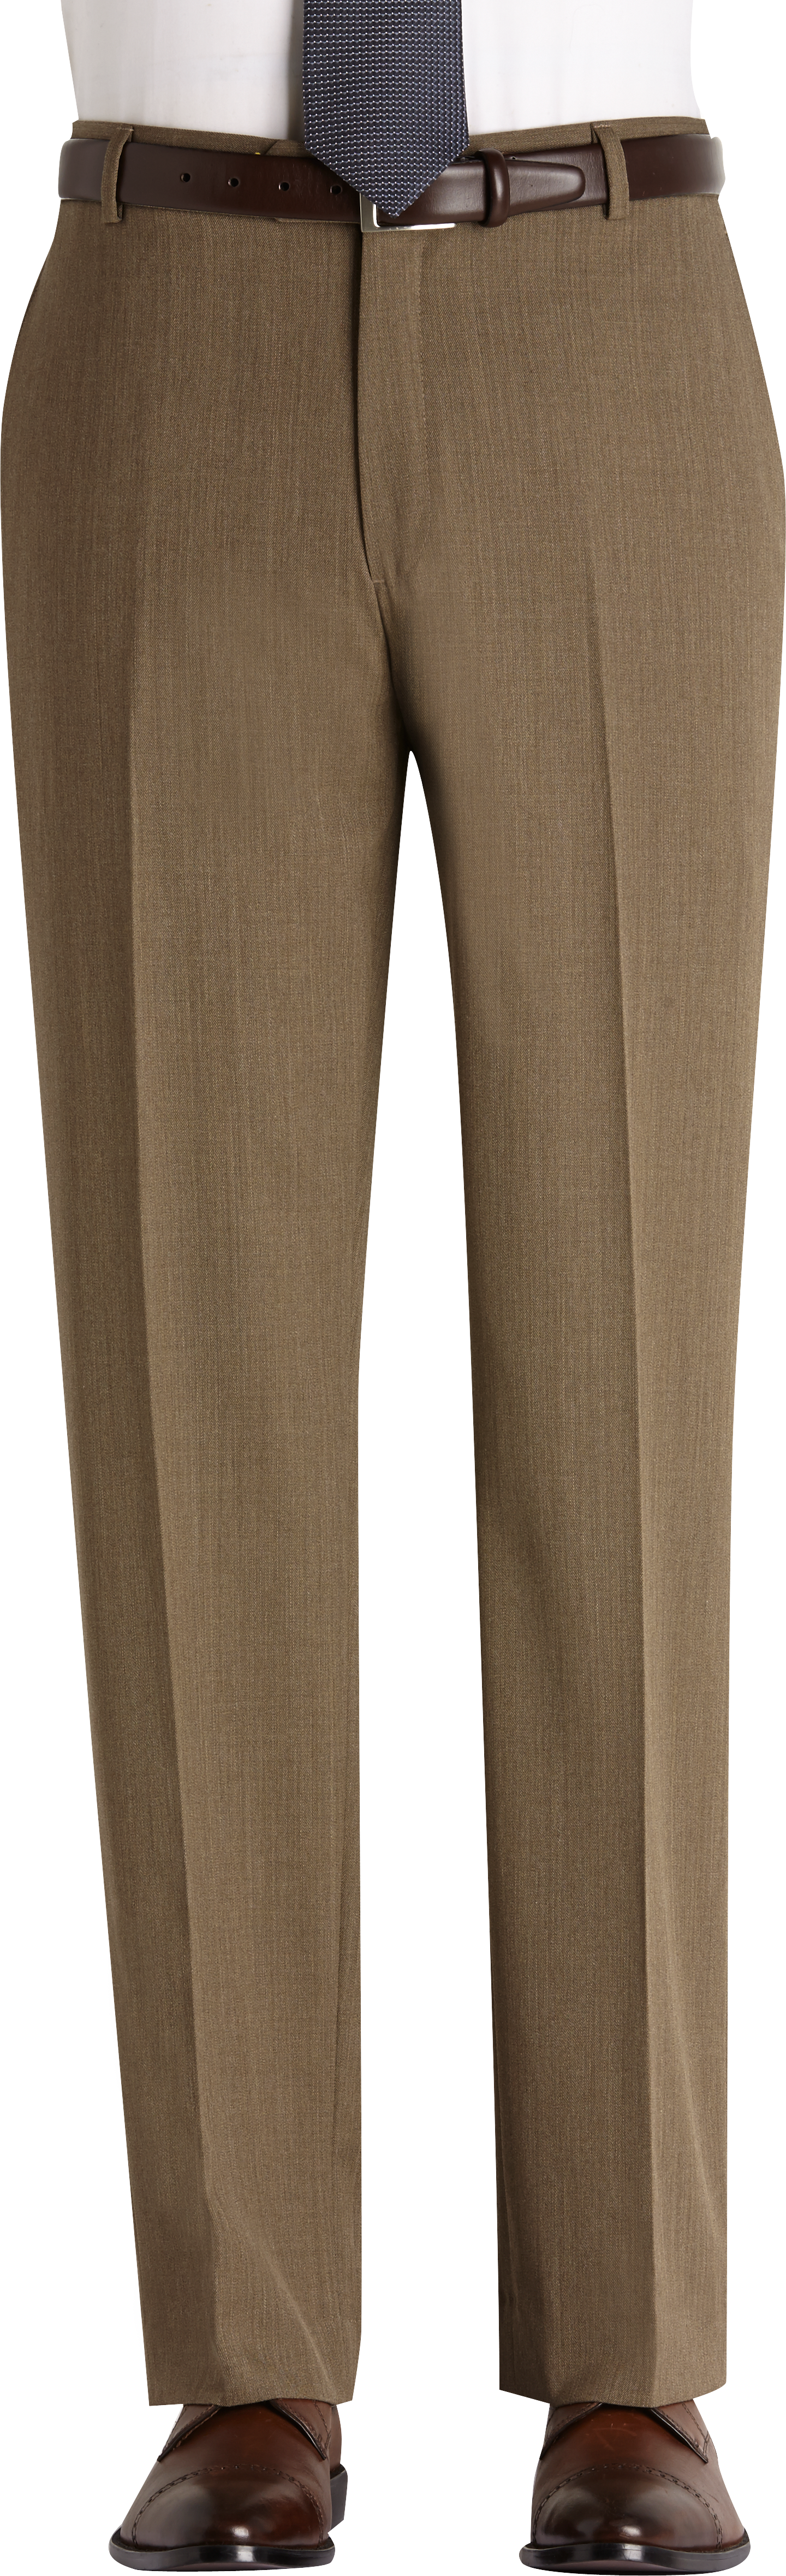 Mens Taupe Pants | Mens Wearhouse